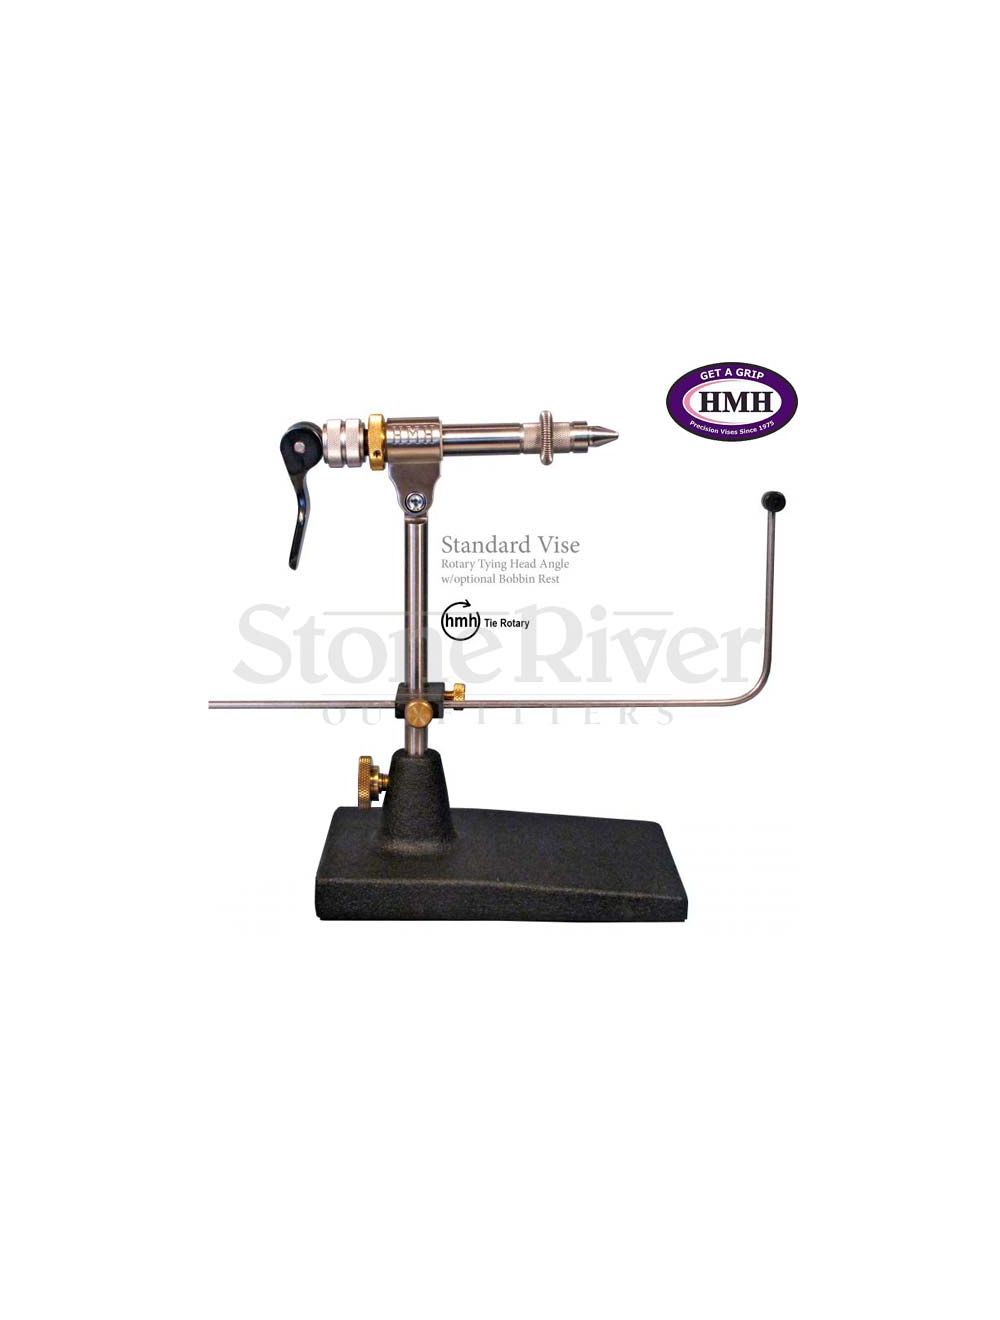 Norvise - Standard Rotary Fly Tying Vise